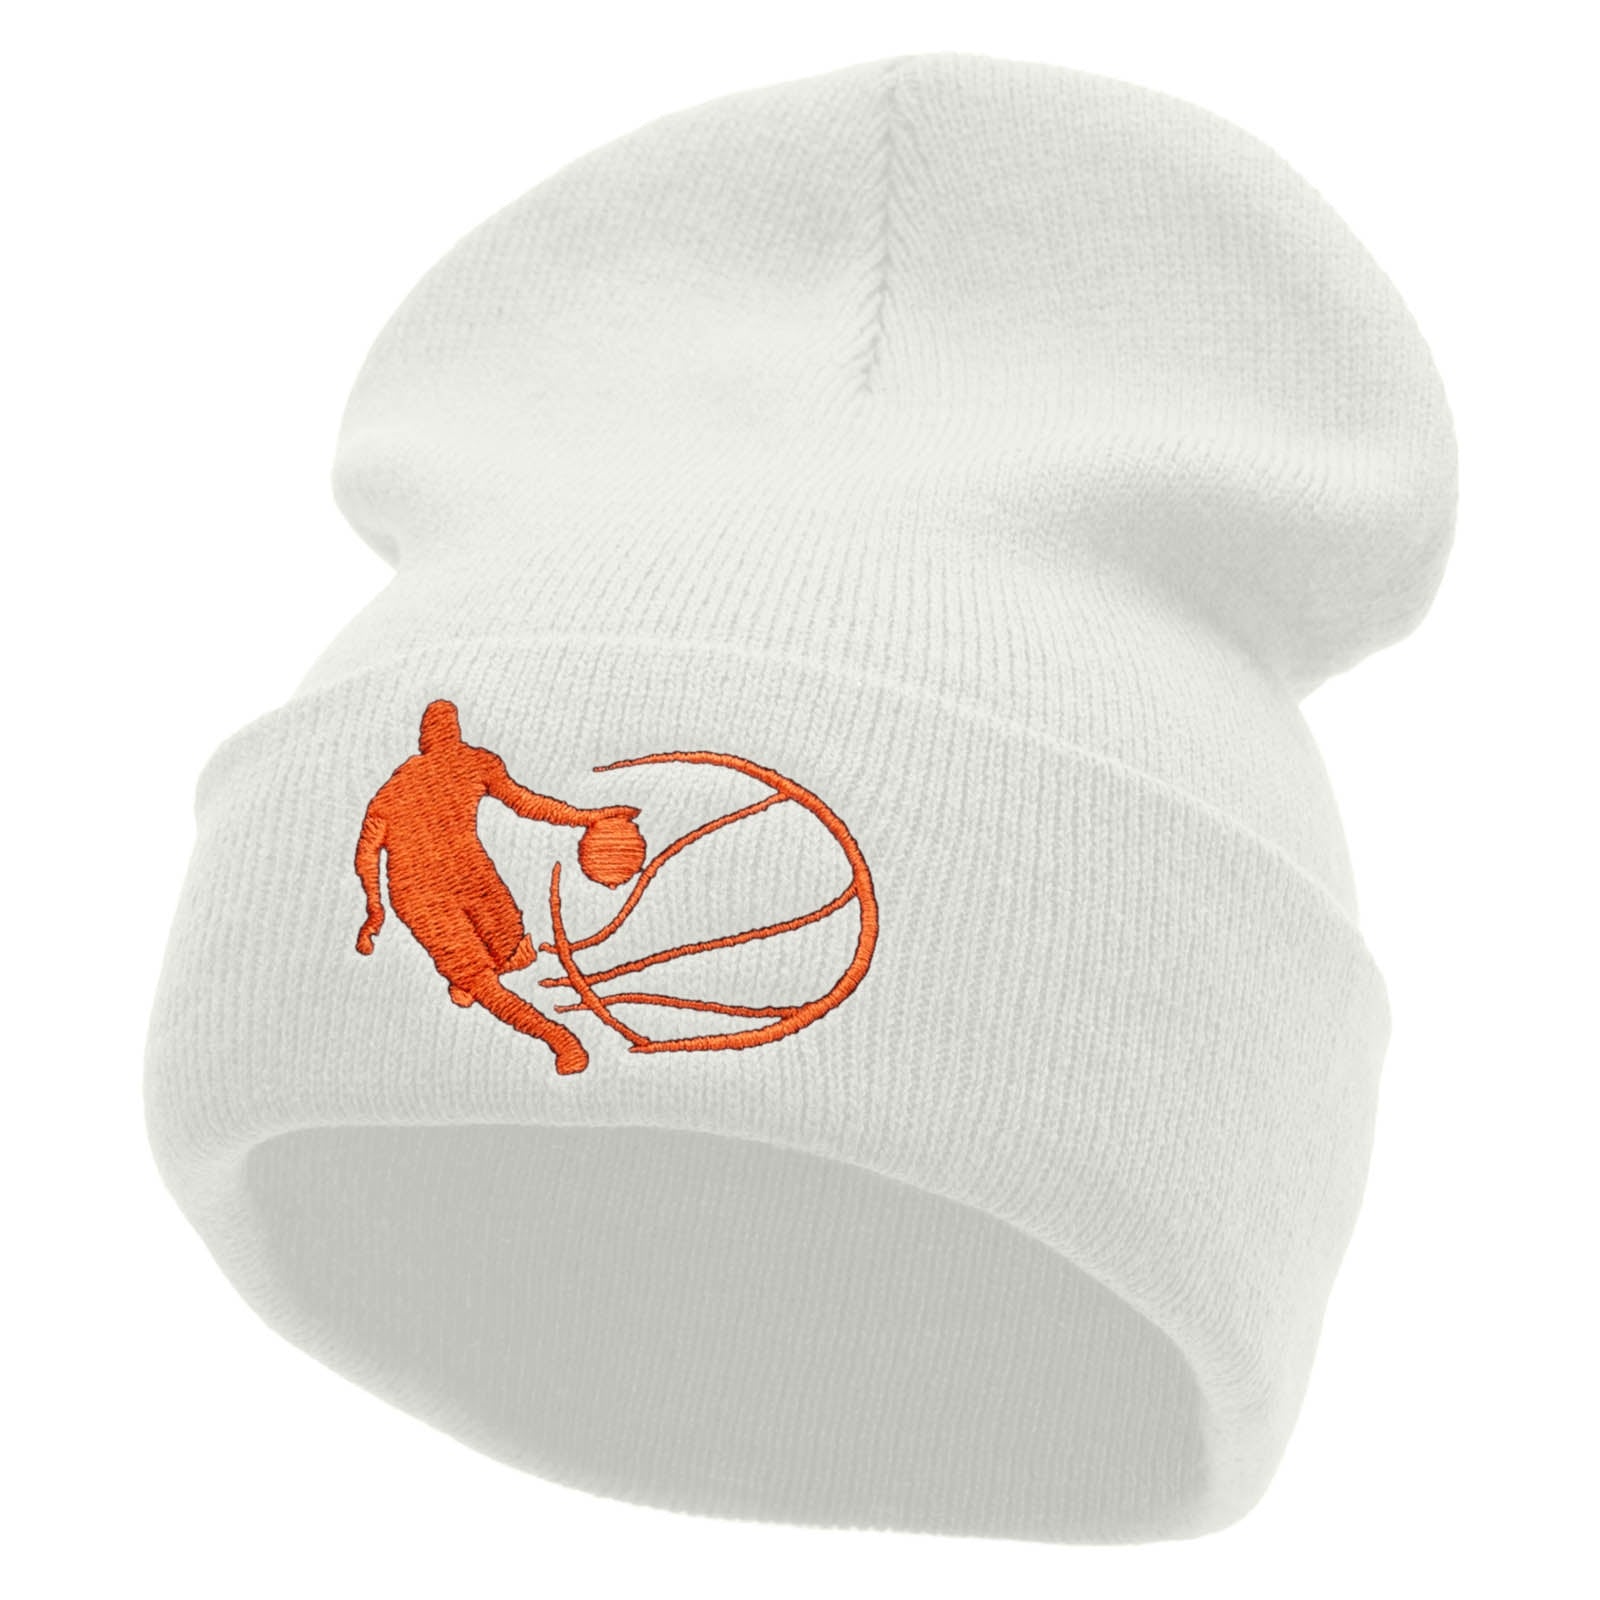 Basketball Dribble Embroidered 12 Inch Long Knitted Beanie - White OSFM